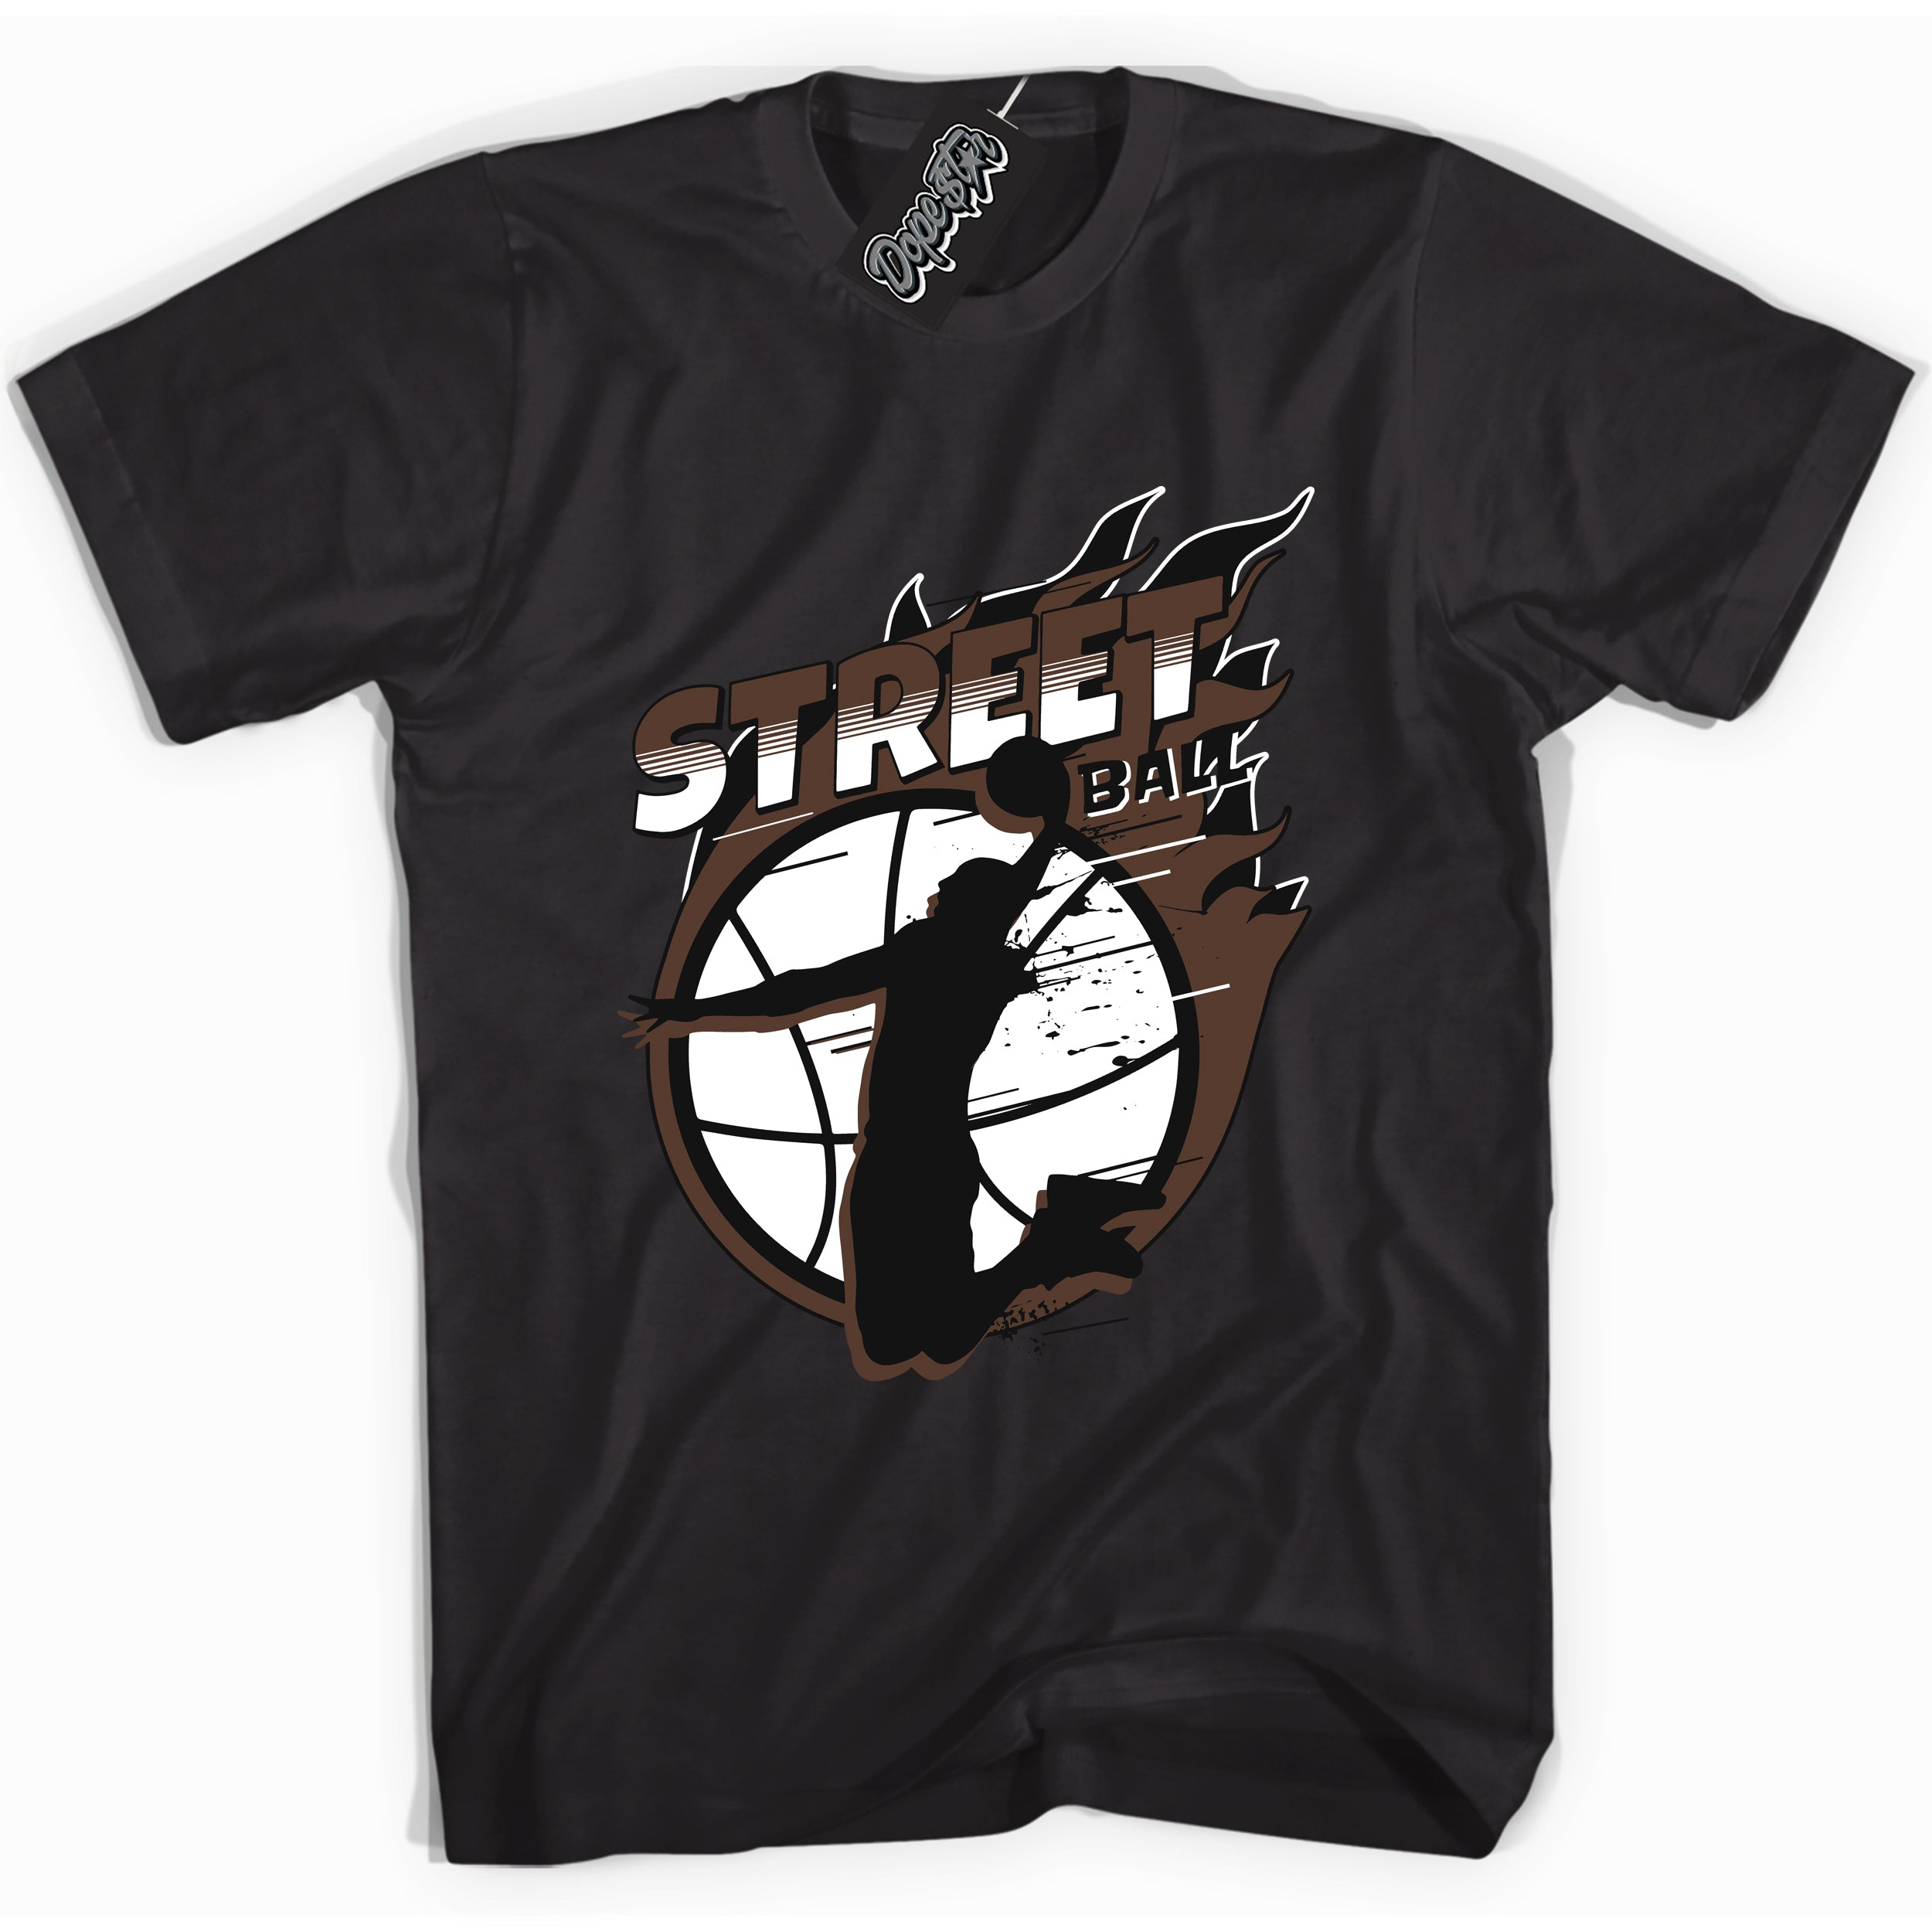 Cool Black graphic tee with “ Street Ball ” design, that perfectly matches Palomino 1s sneakers 